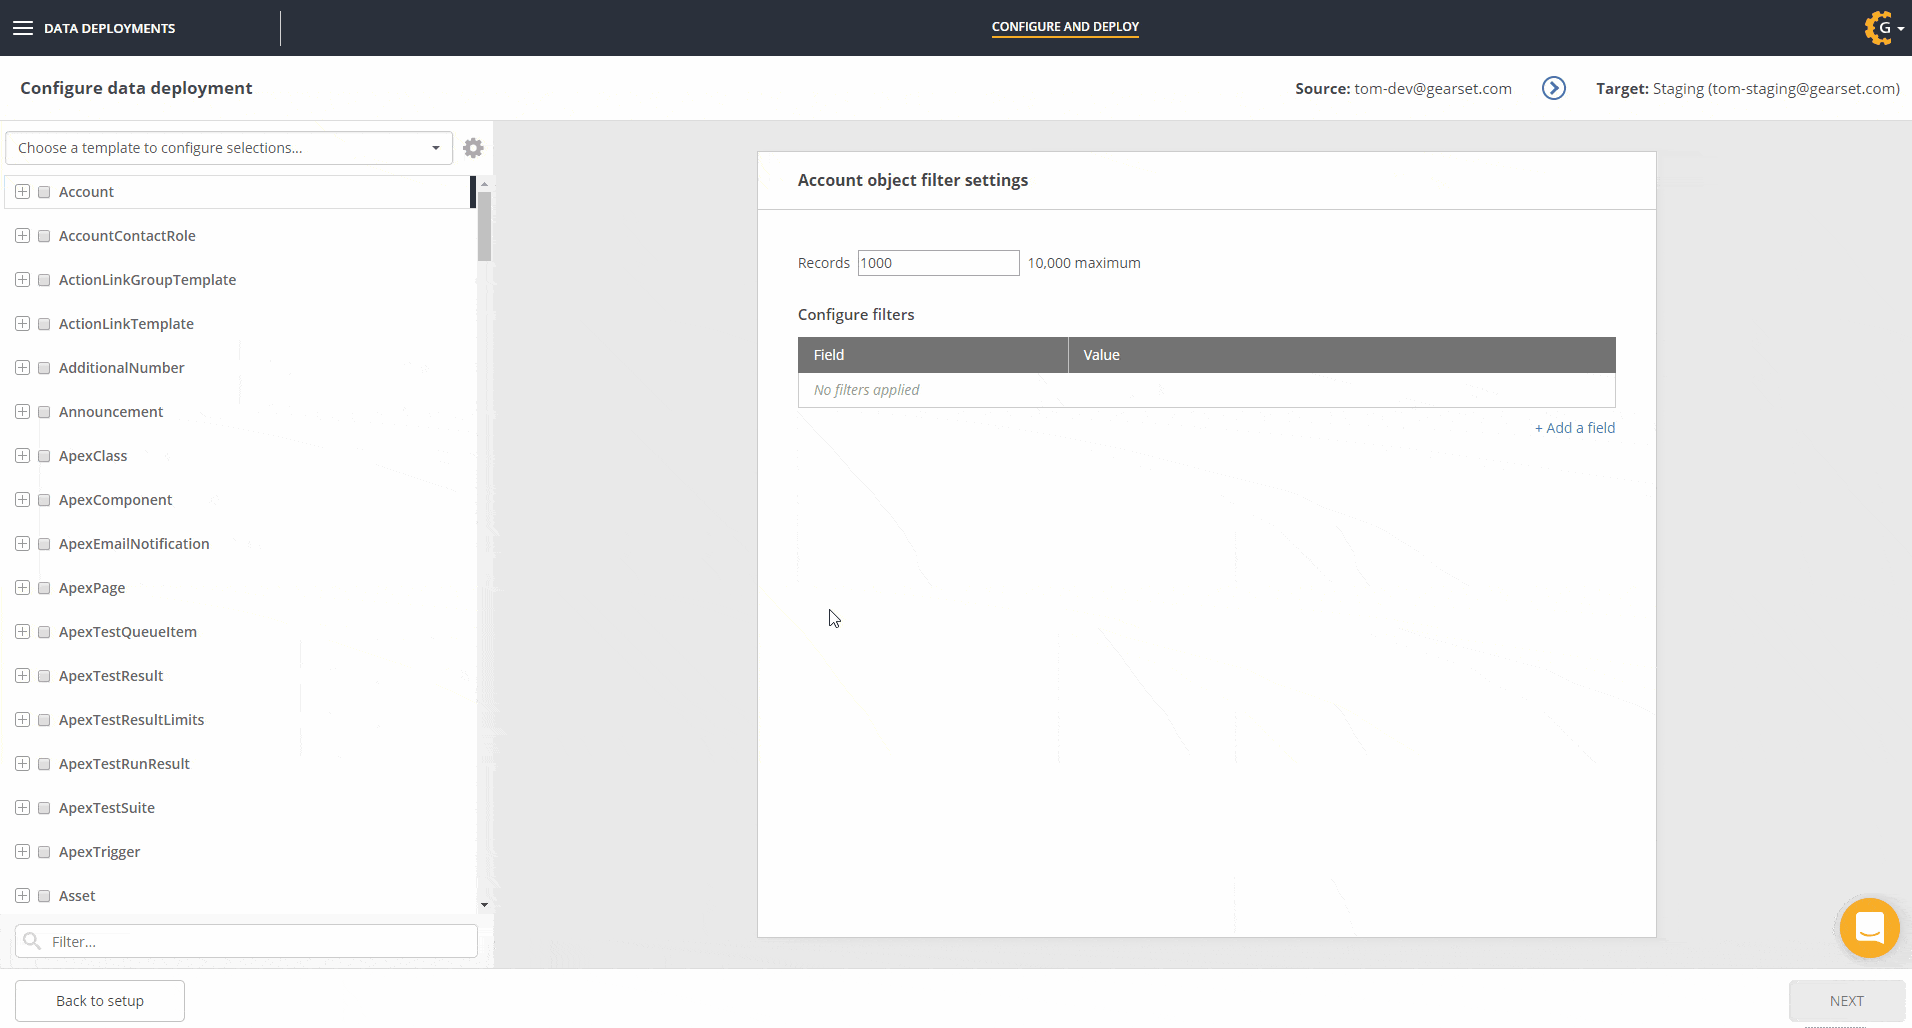 You can rename or delete data templates which you created